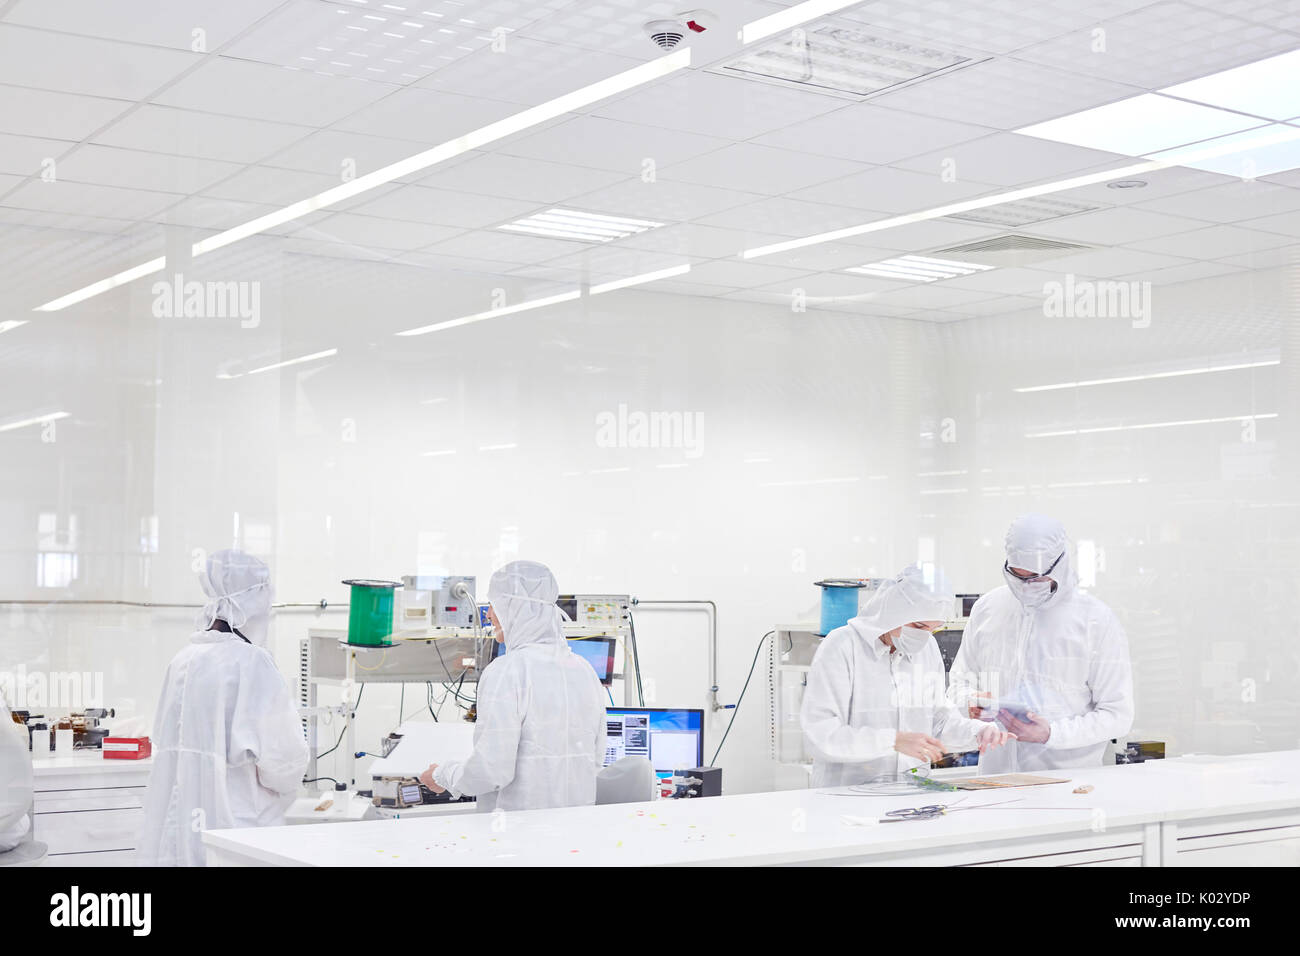 Engineers in clean suits using machinery in fiber optics research and testing lab Stock Photo